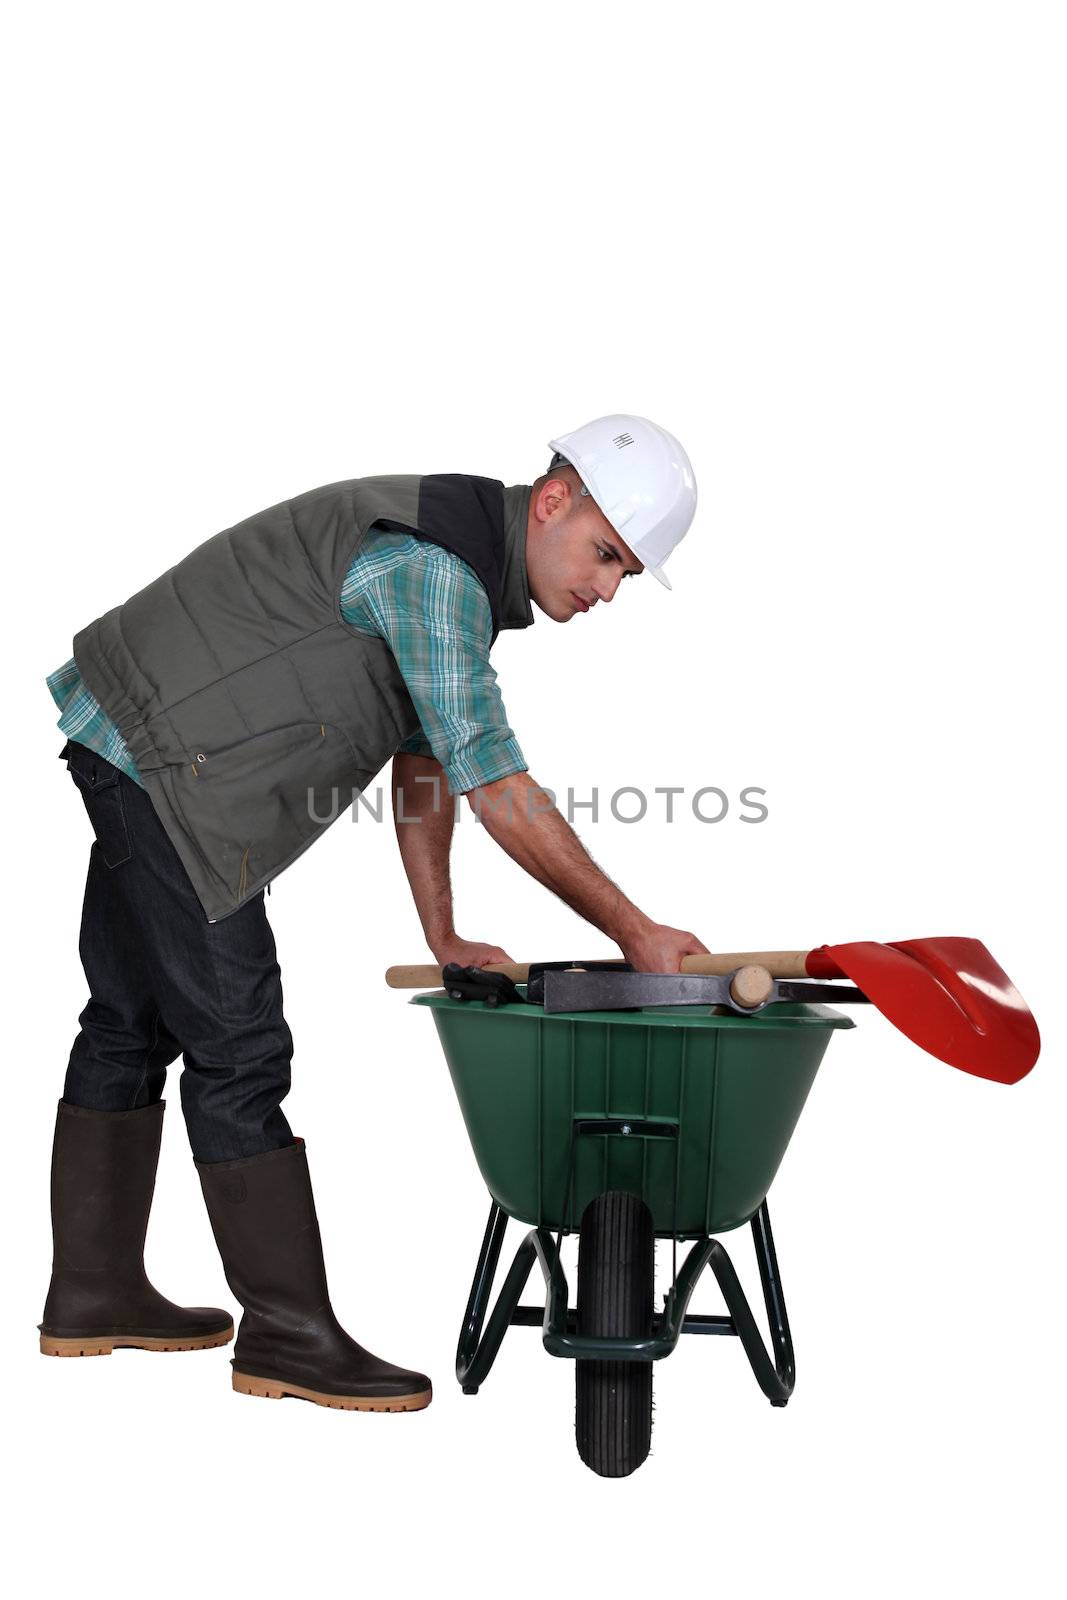 Labourer placing his tools in a wheelbarrow by phovoir